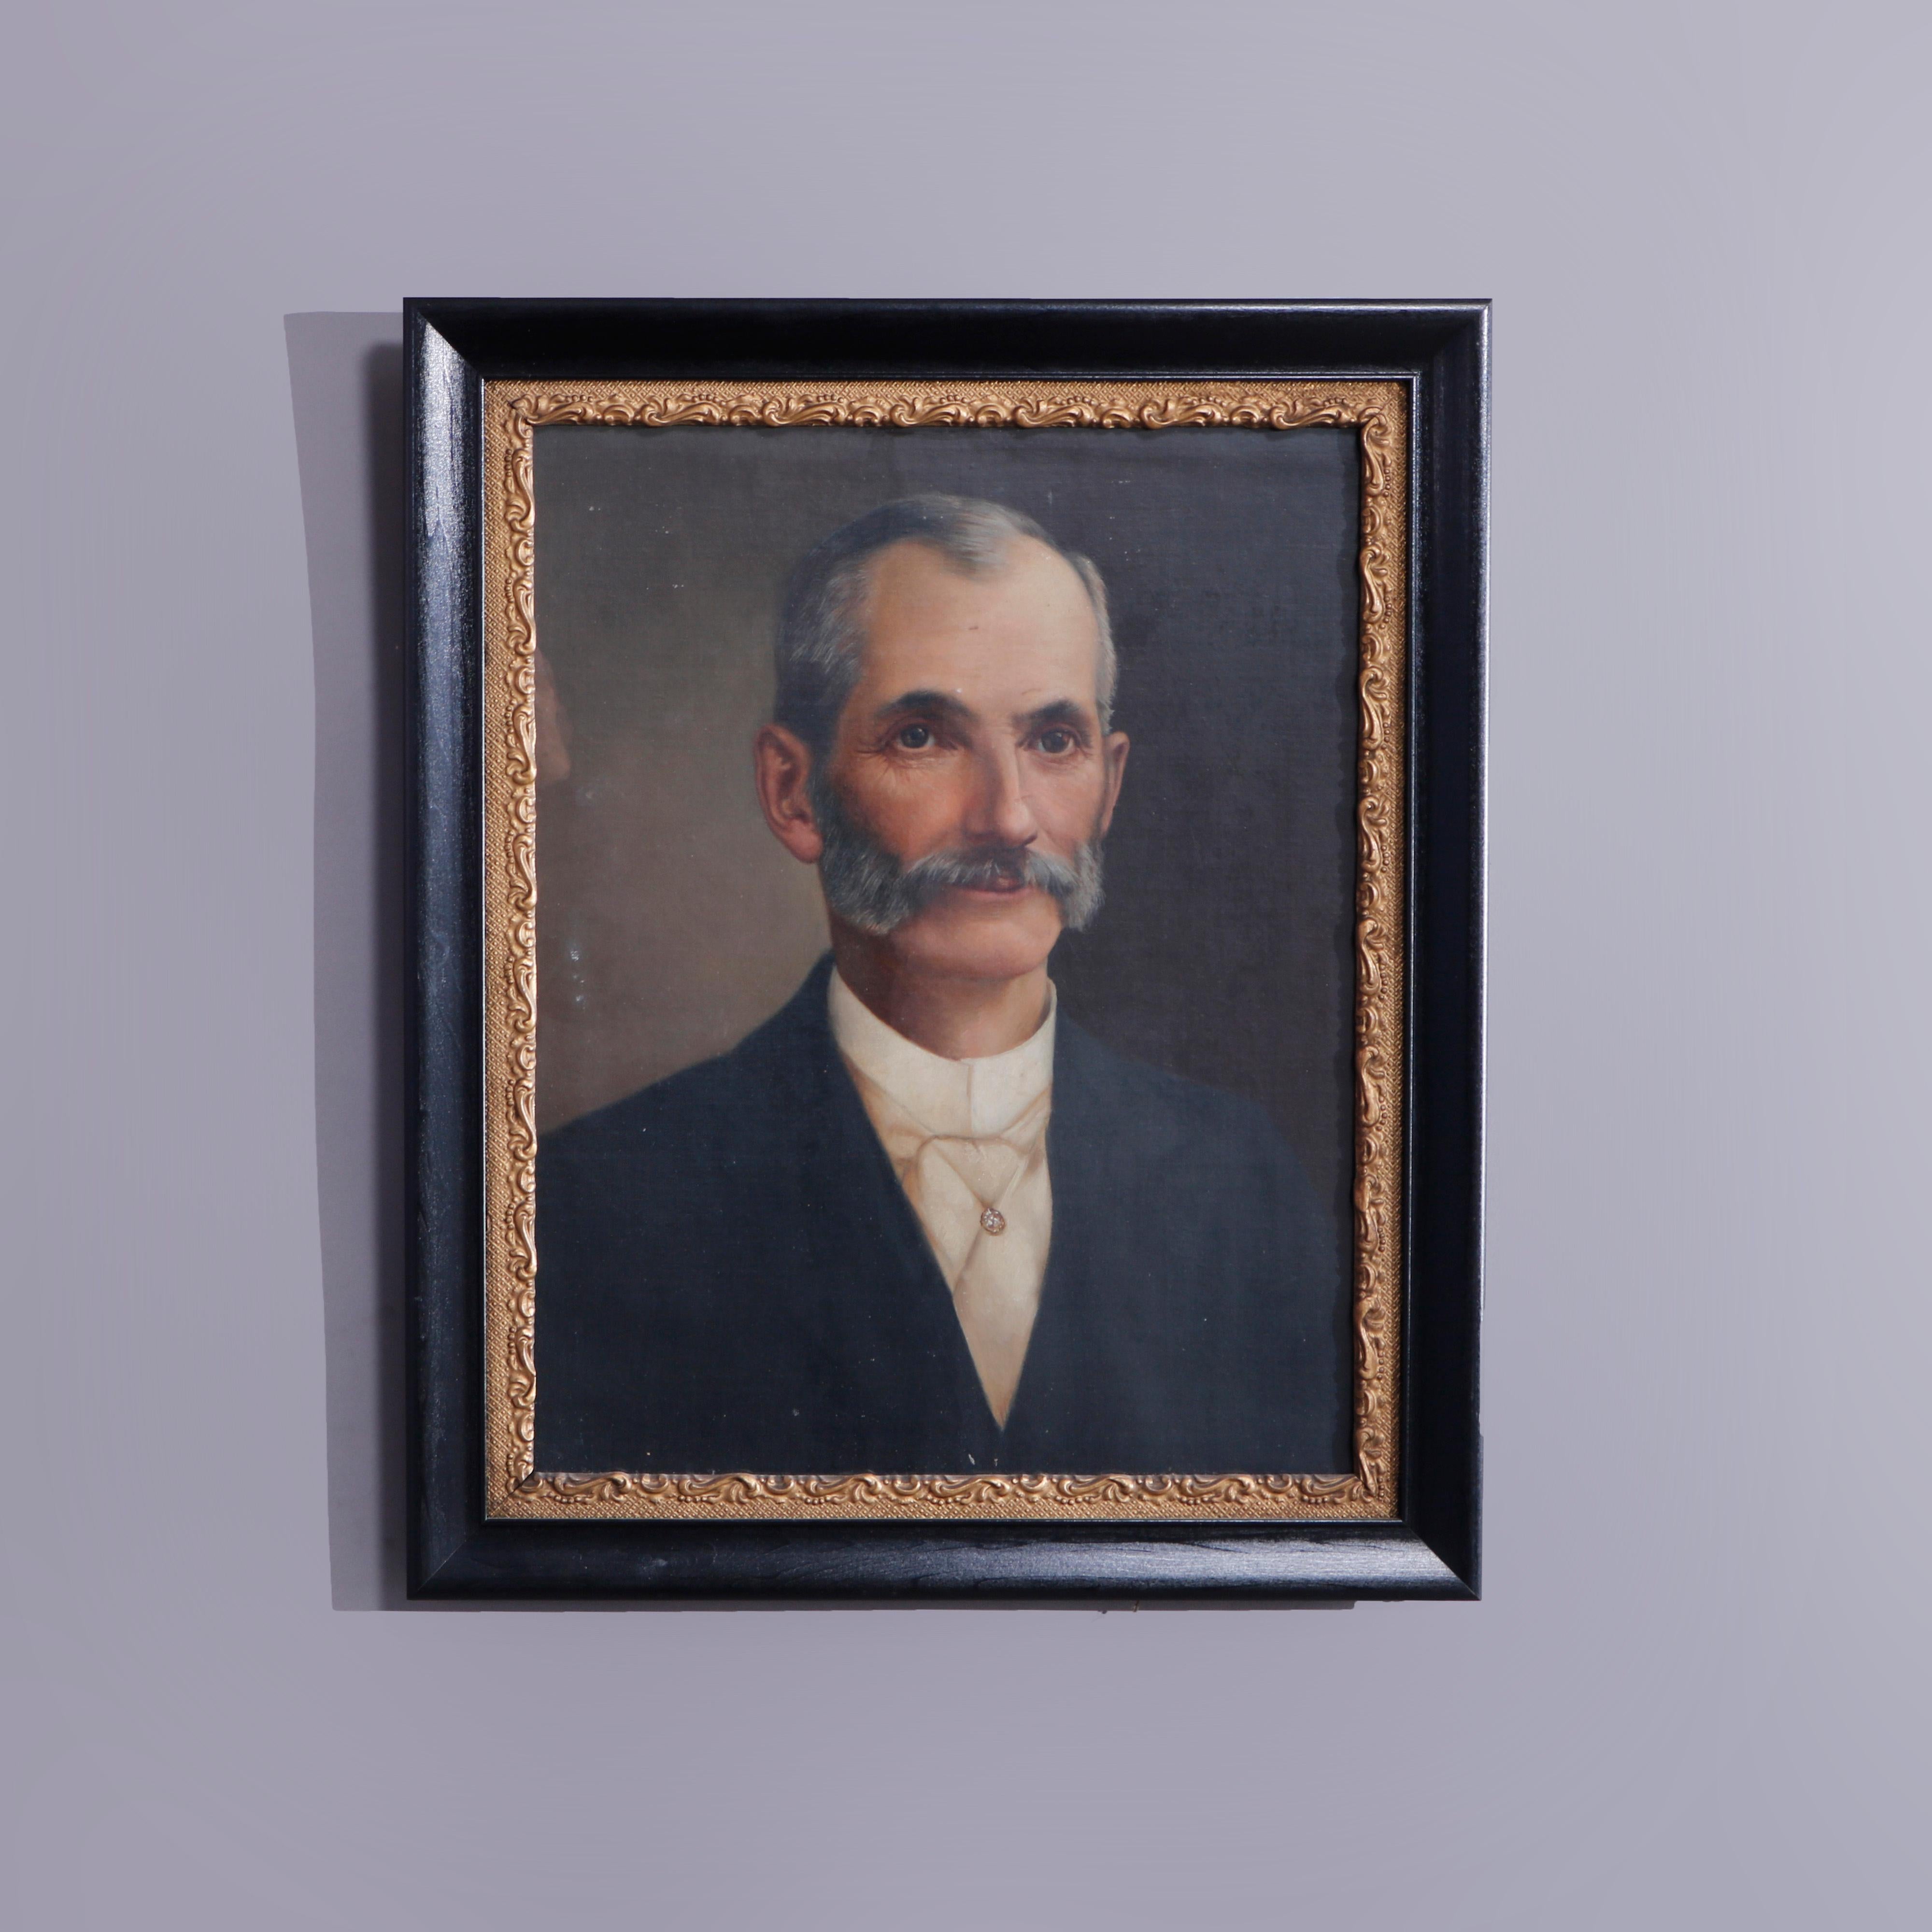 An antique painting of a gentleman offers oil on canvas laid on board portrait of a gentleman, en verso attribution to Charles Walz 1910, seated in ebonized and gilt wood frame, early 20th century

Measures - 24.25'' H x 20.25'' W x 1'' D; sight: